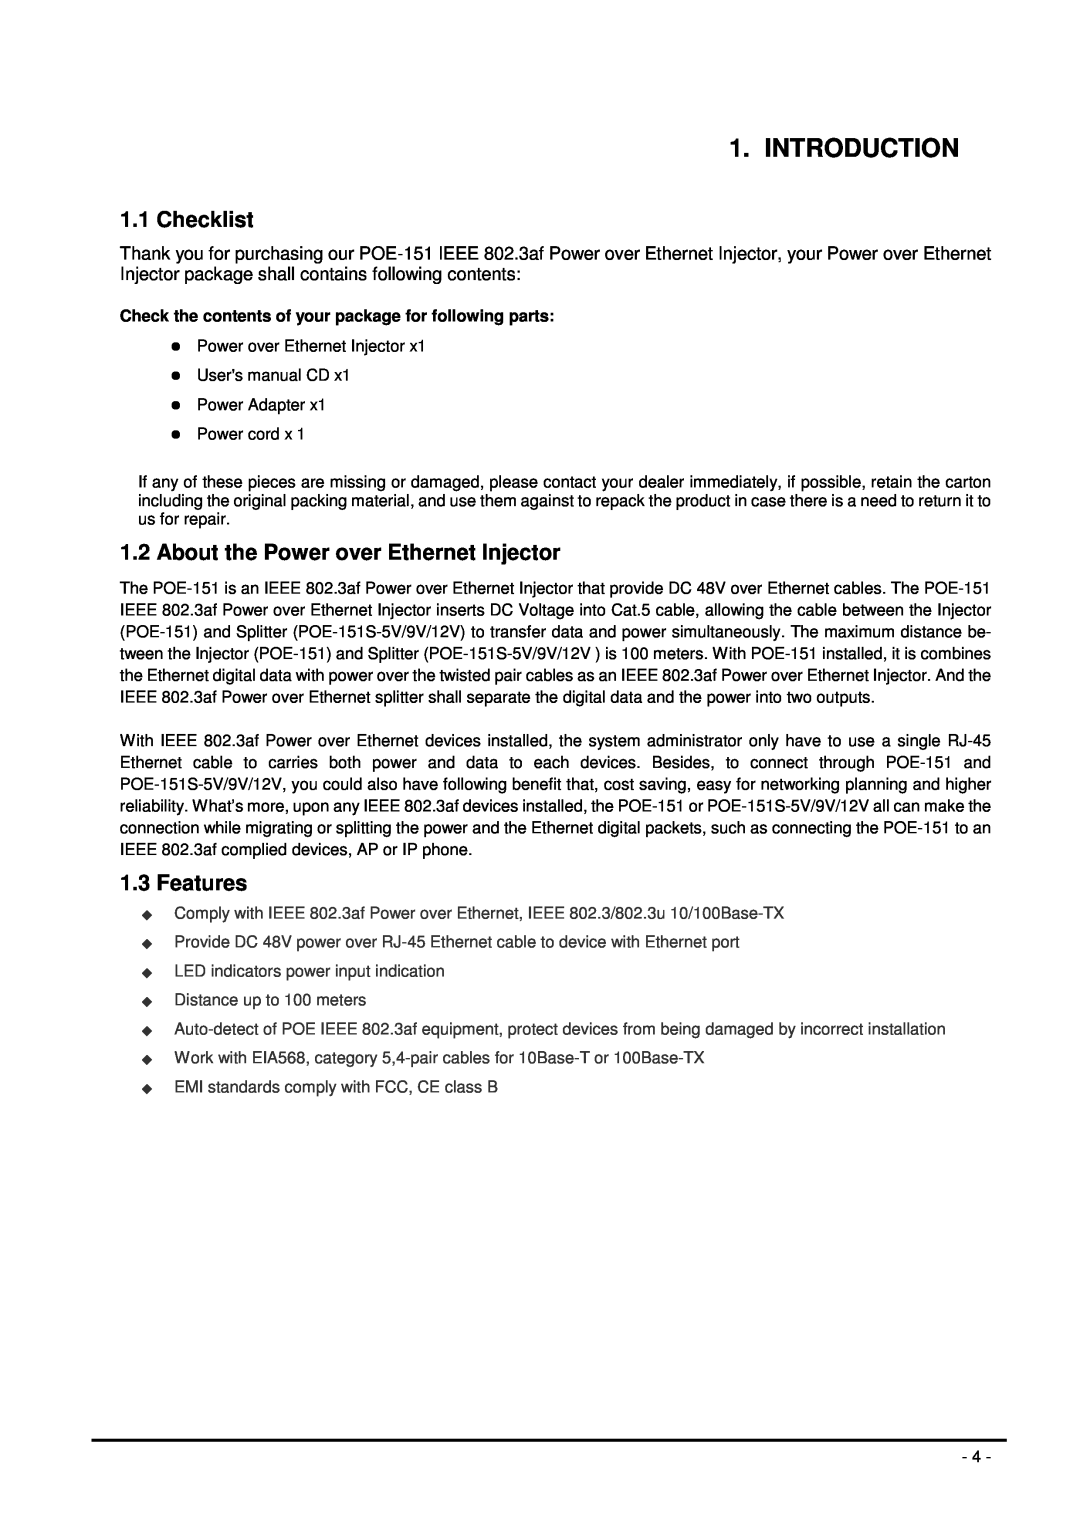 Planet Technology POE-151 user manual Introduction, Checklist, About the Power over Ethernet Injector, Features 